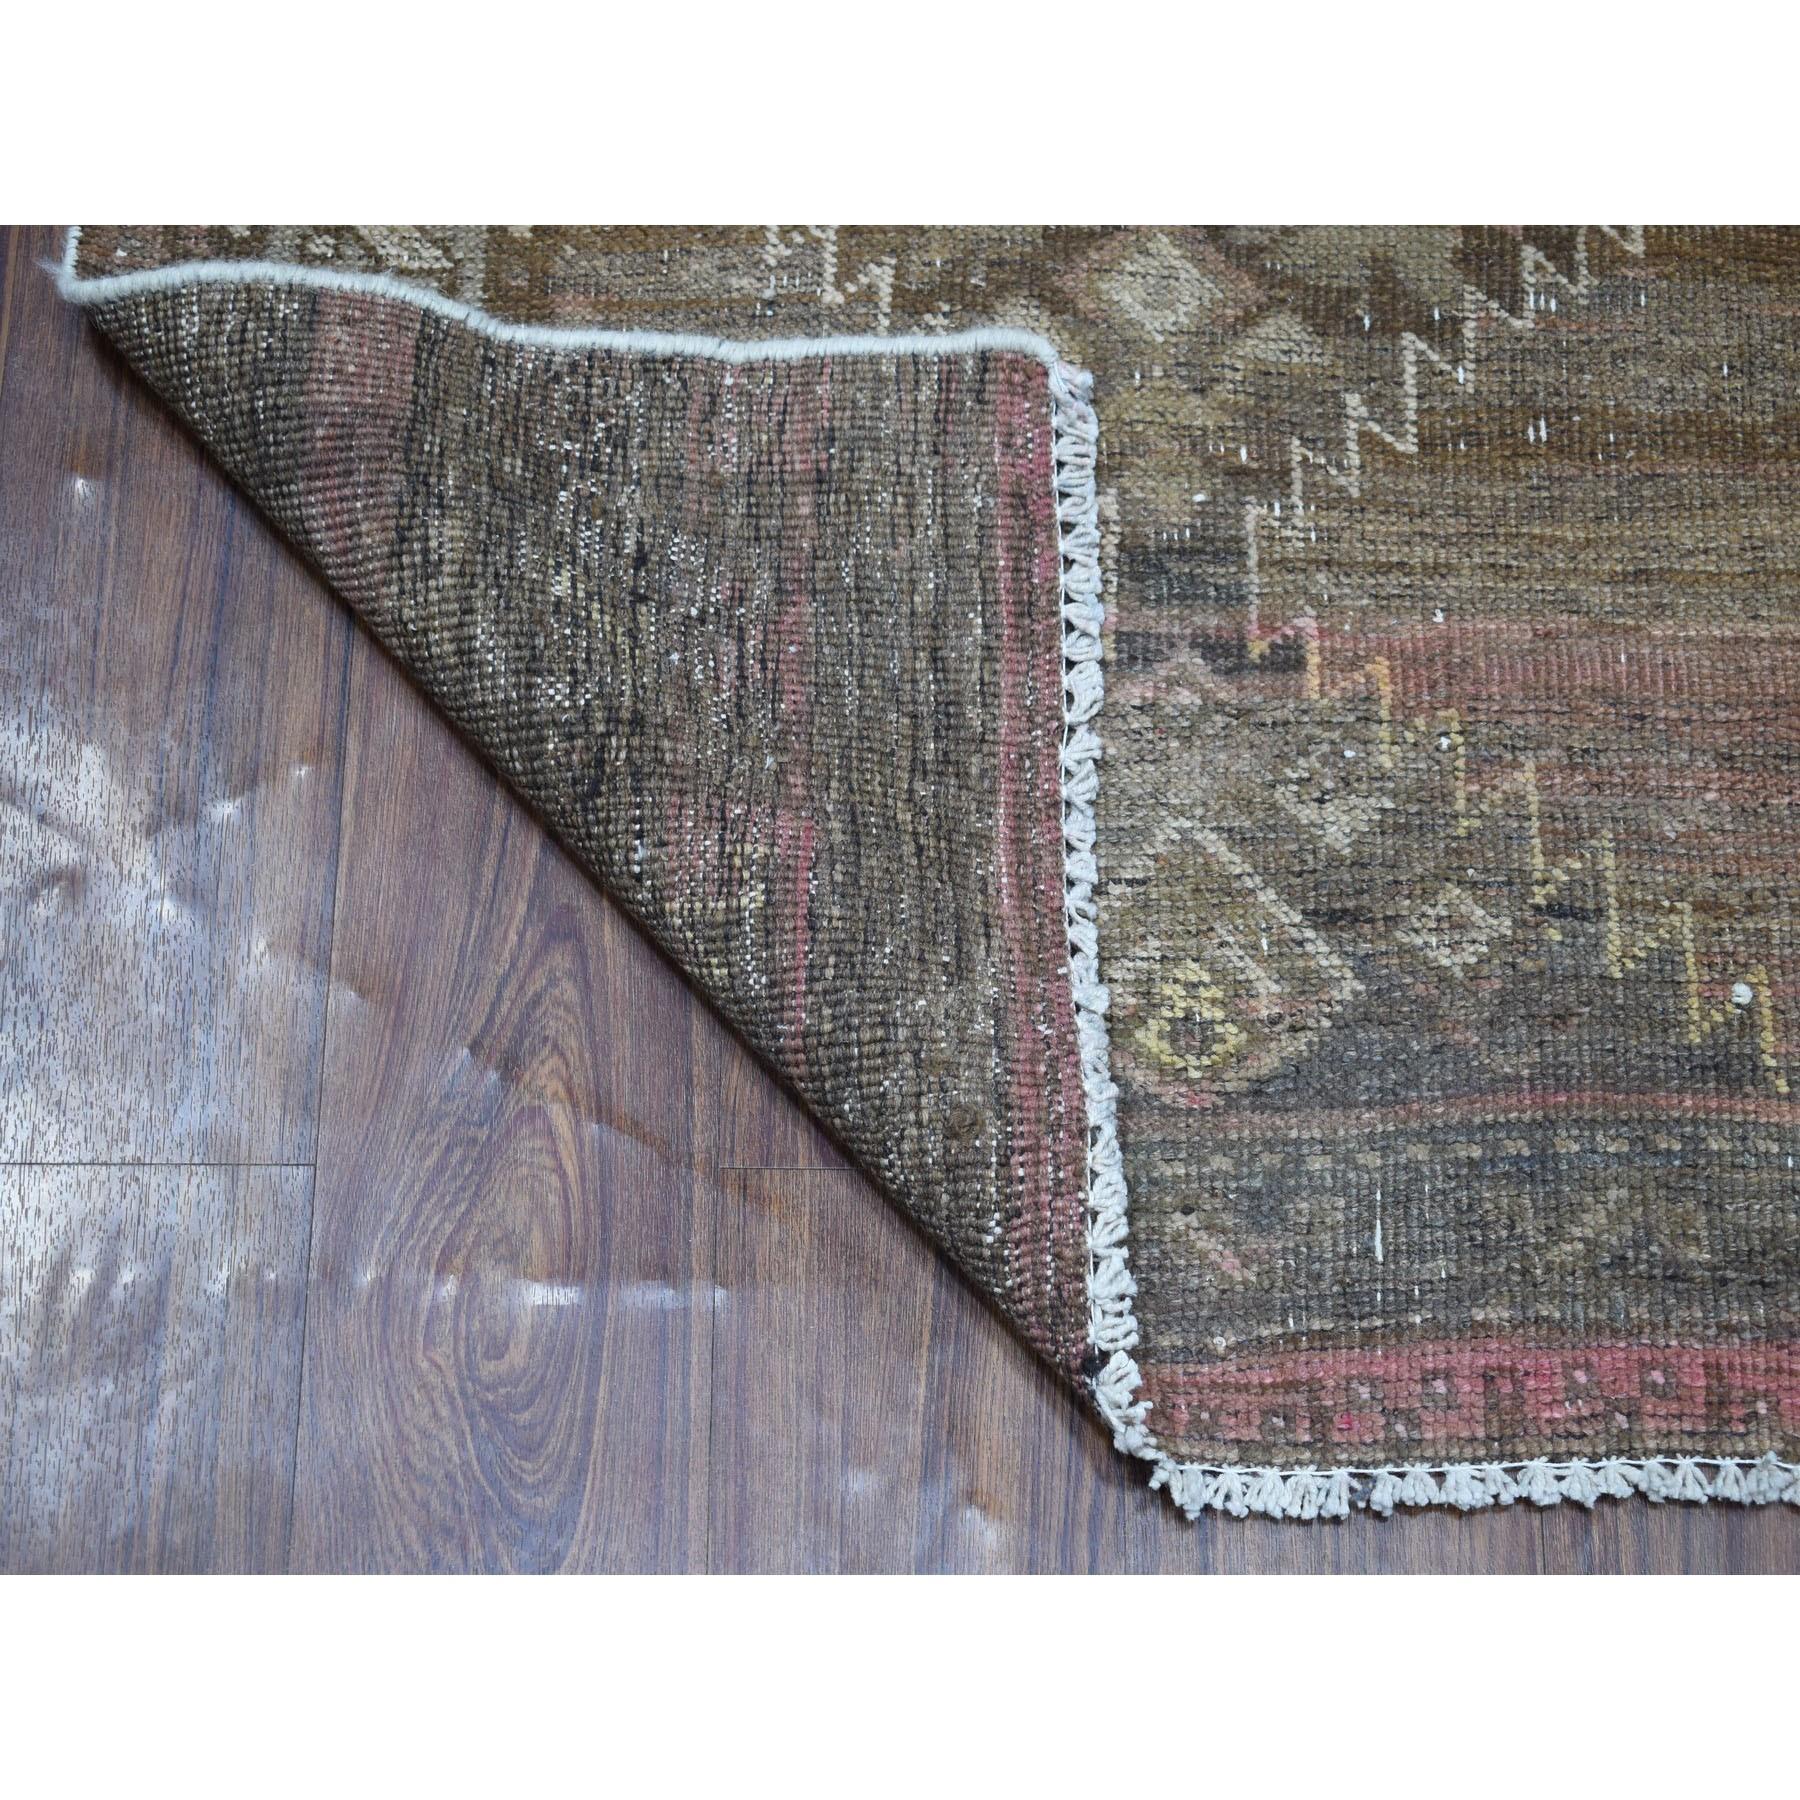 This fabulous Hand-Knotted carpet has been created and designed for extra strength and durability. This rug has been handcrafted for weeks in the traditional method that is used to make
Exact Rug Size in Feet and Inches : 3'3